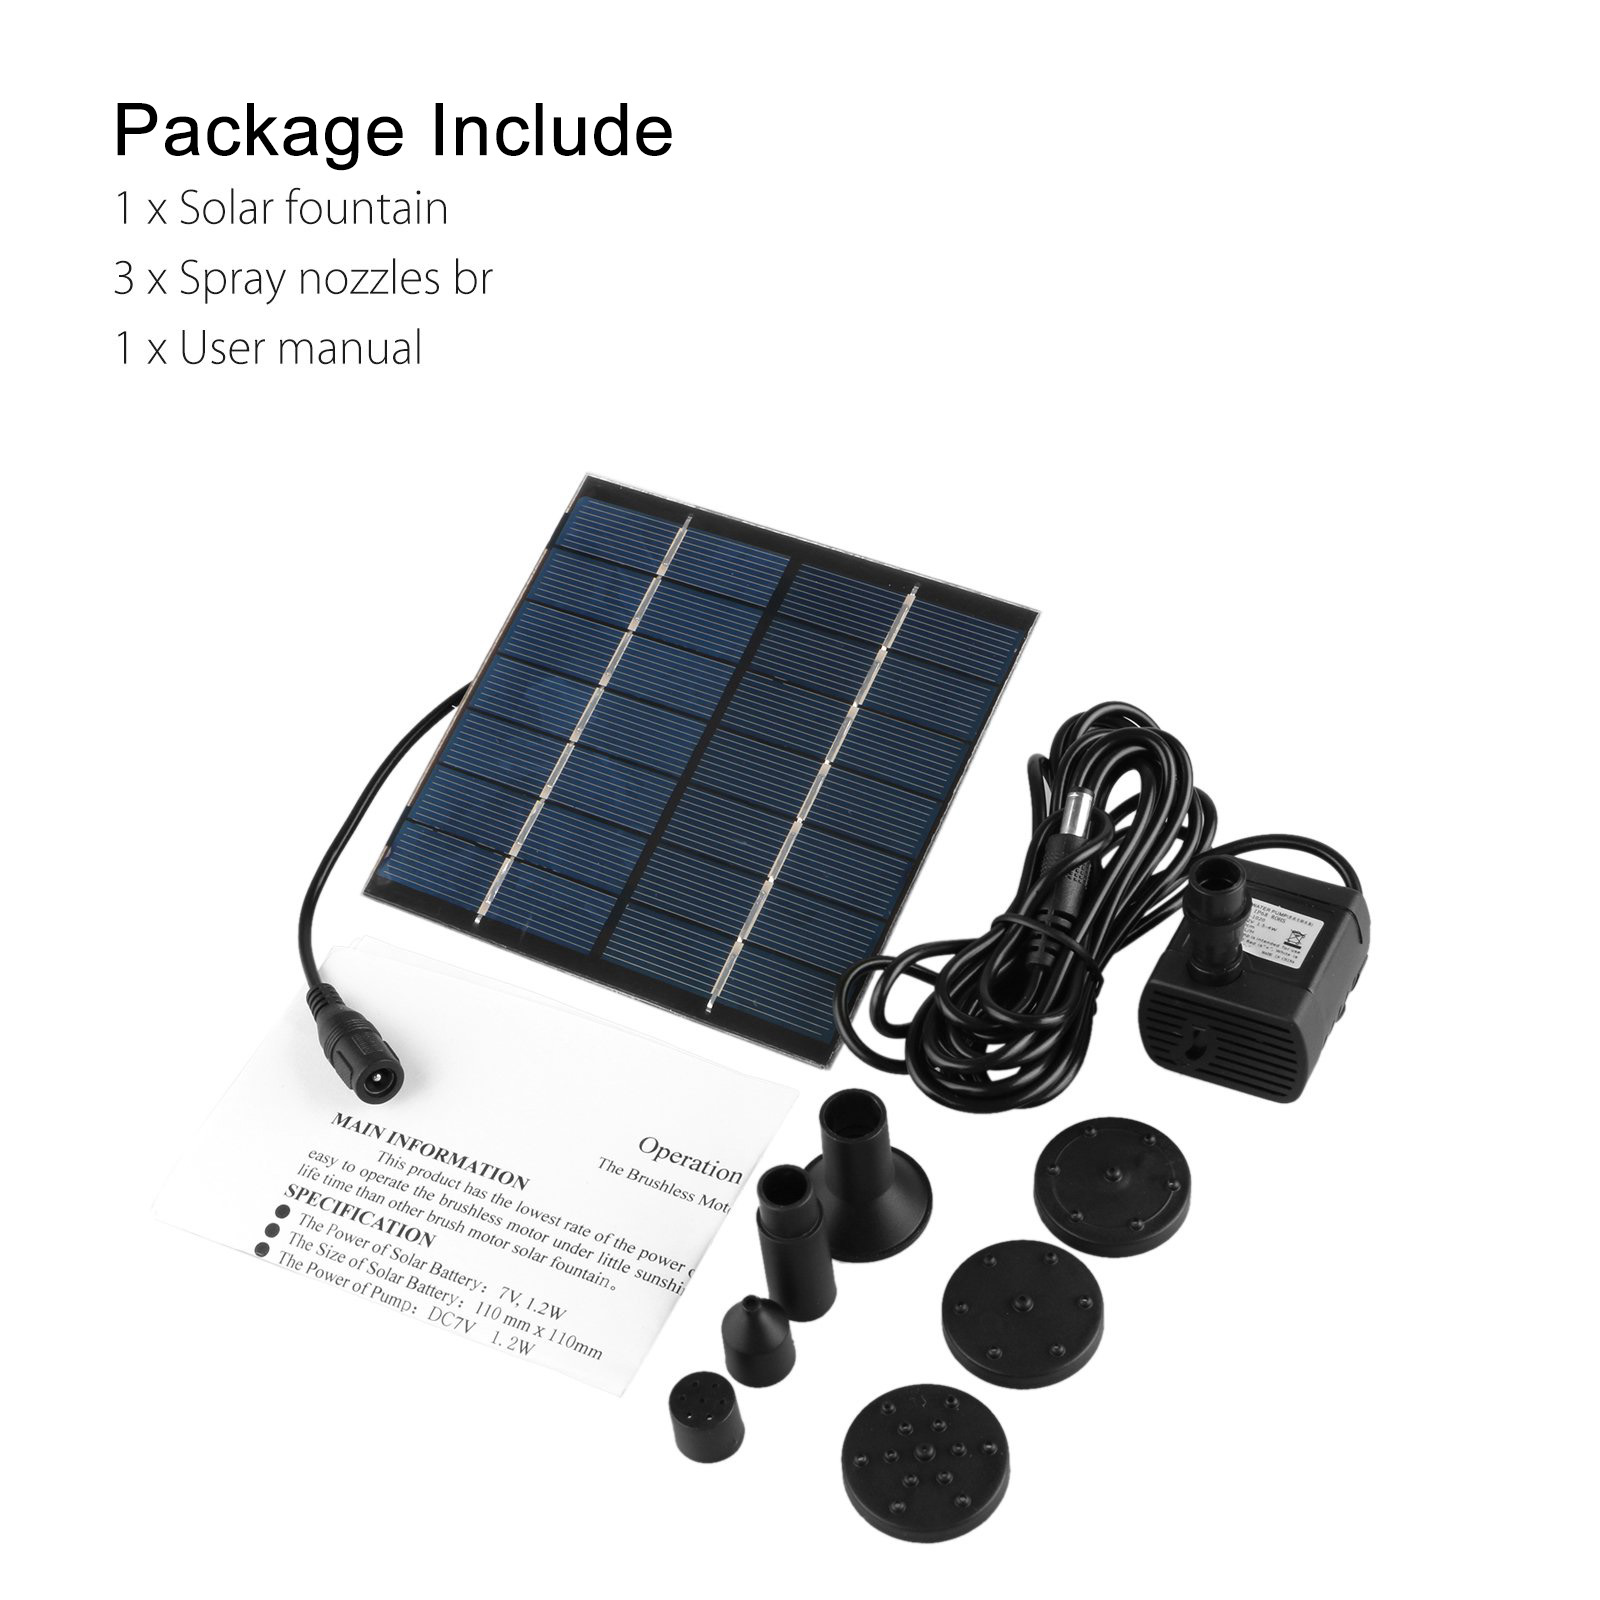 EEEkit 1.2W Solar Fountain, Submersible Water Pump for Bird Bath, Solar Panel Kit for Outdoor Pond, Patio, Garden, 4 Types Sprinkler Heads with Different Water Flows and Water Heights - image 3 of 10